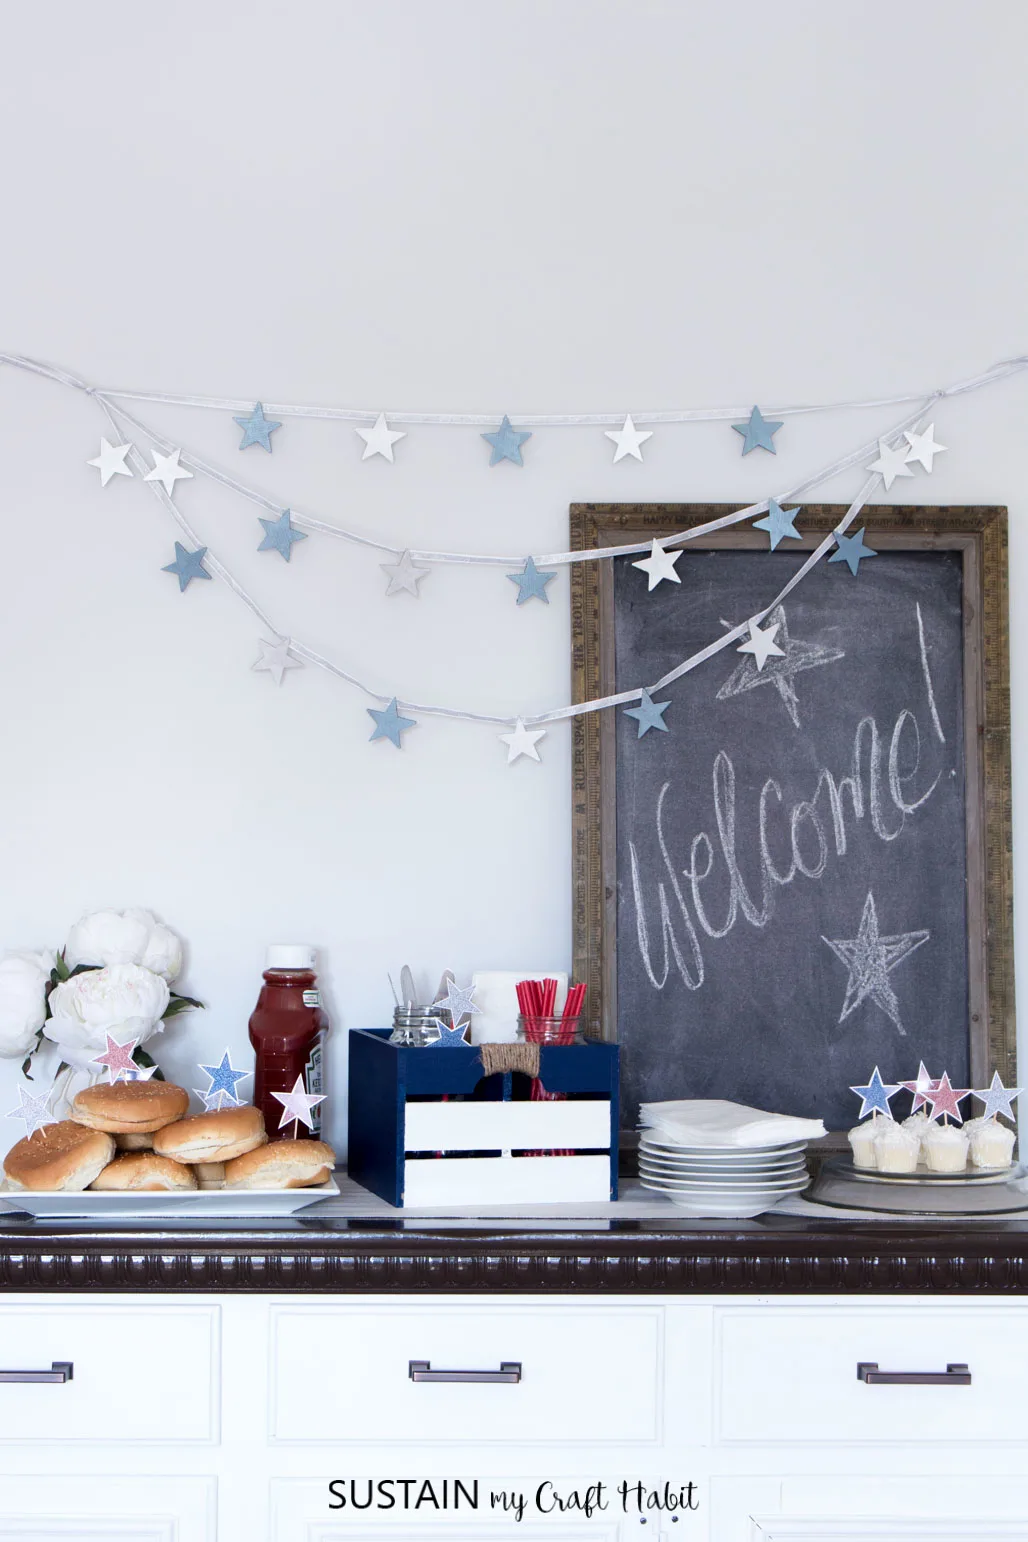 4 of July decorations including printable glitter star cake toppers and wood BBQ caddy